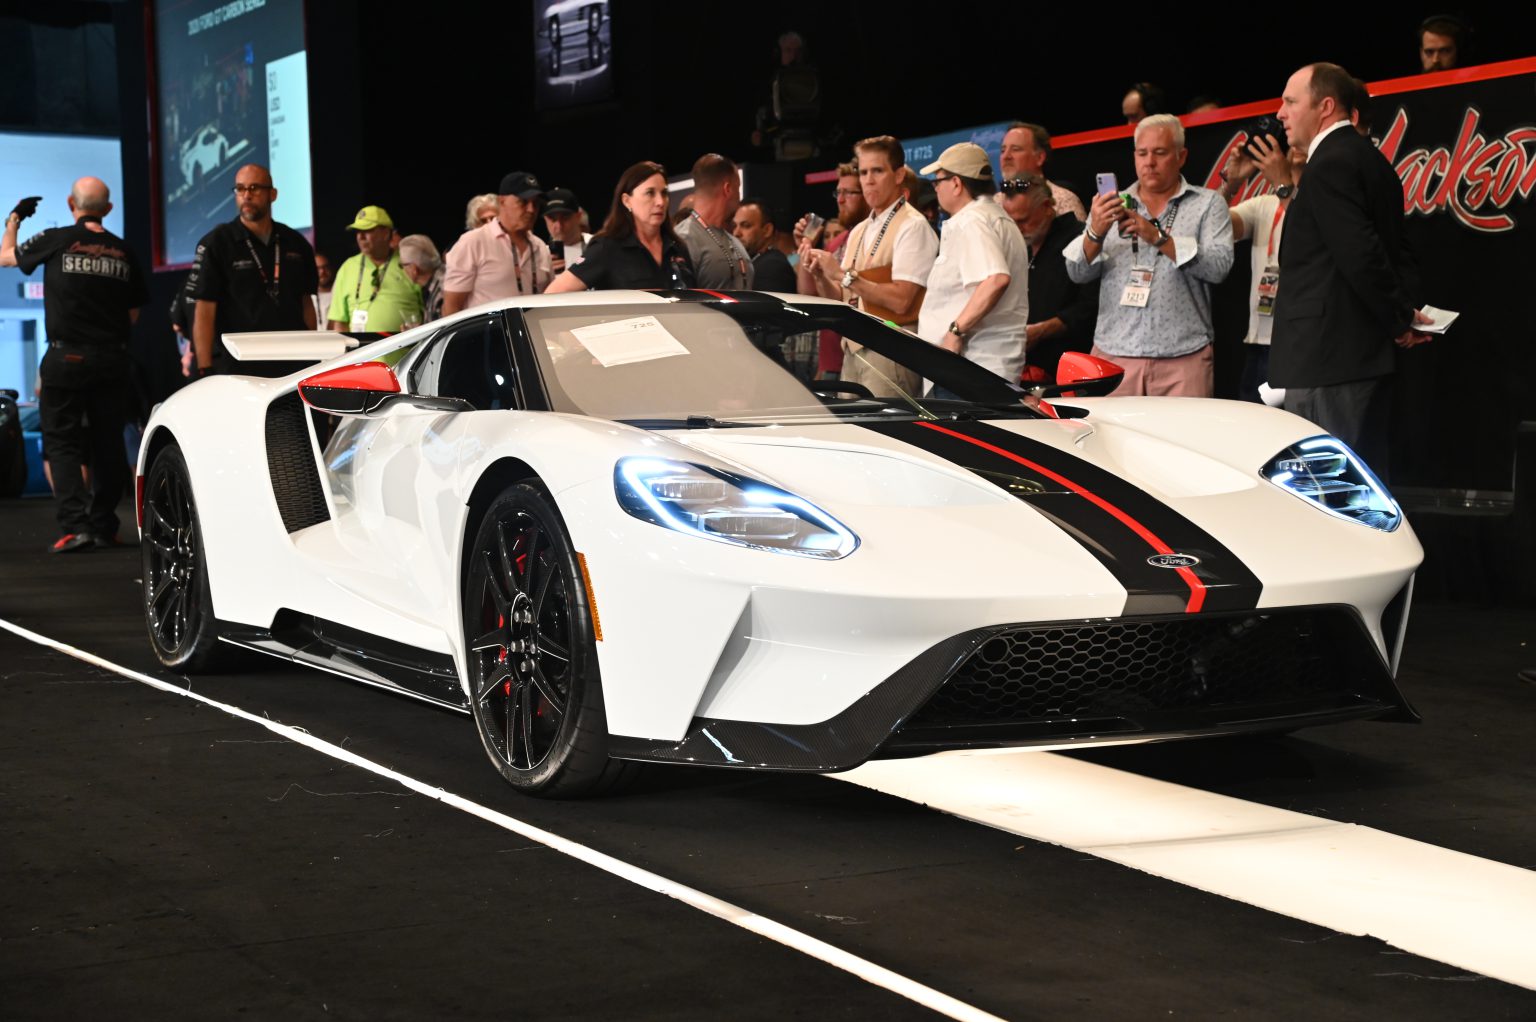 BarrettJackson set Palm Beach auction record with 60.7 million in